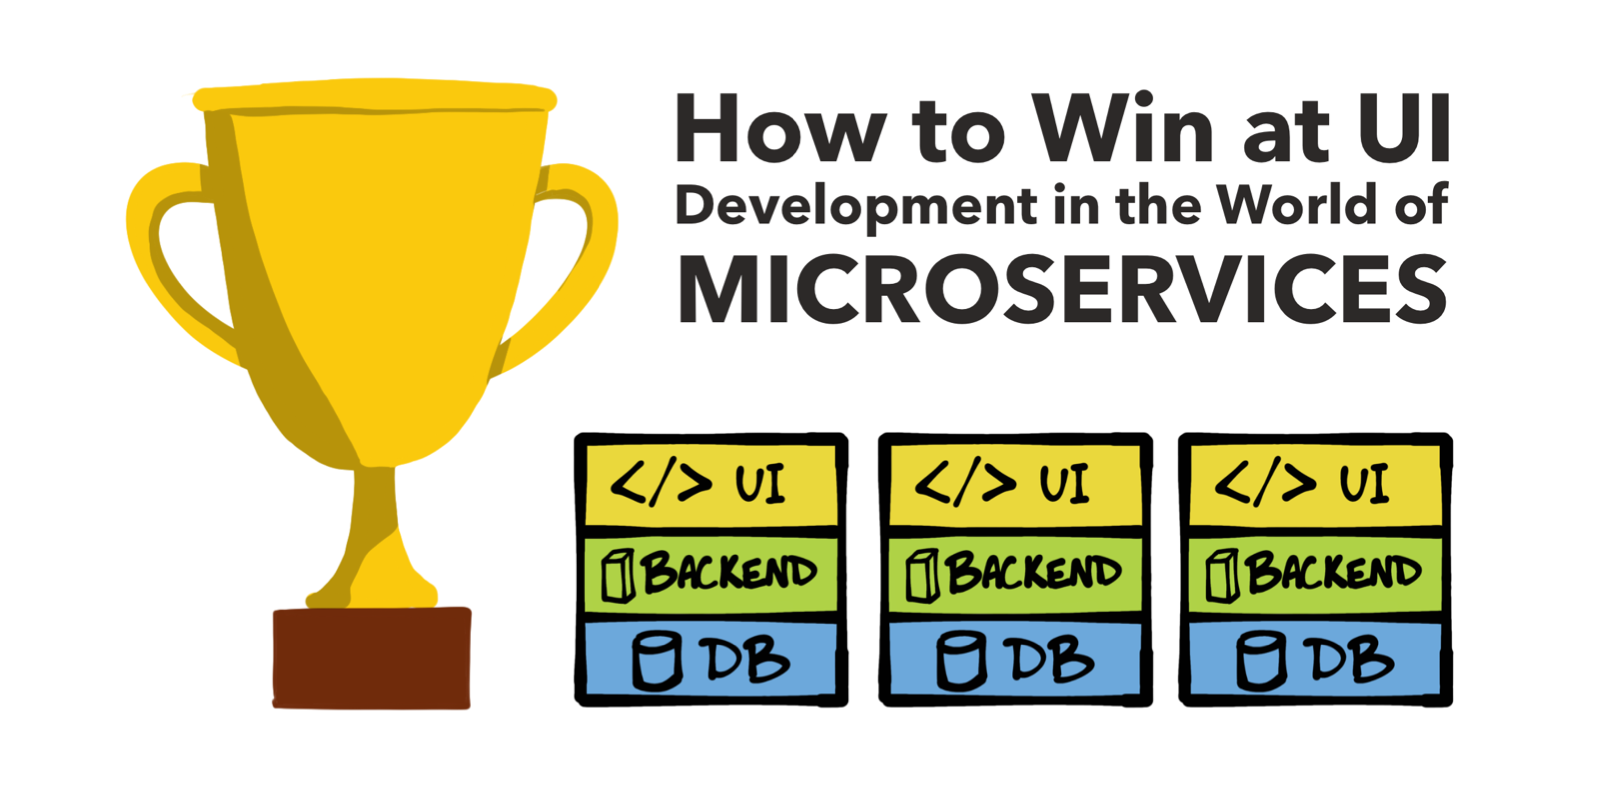 How to Win at UI Development in the World of Microservices